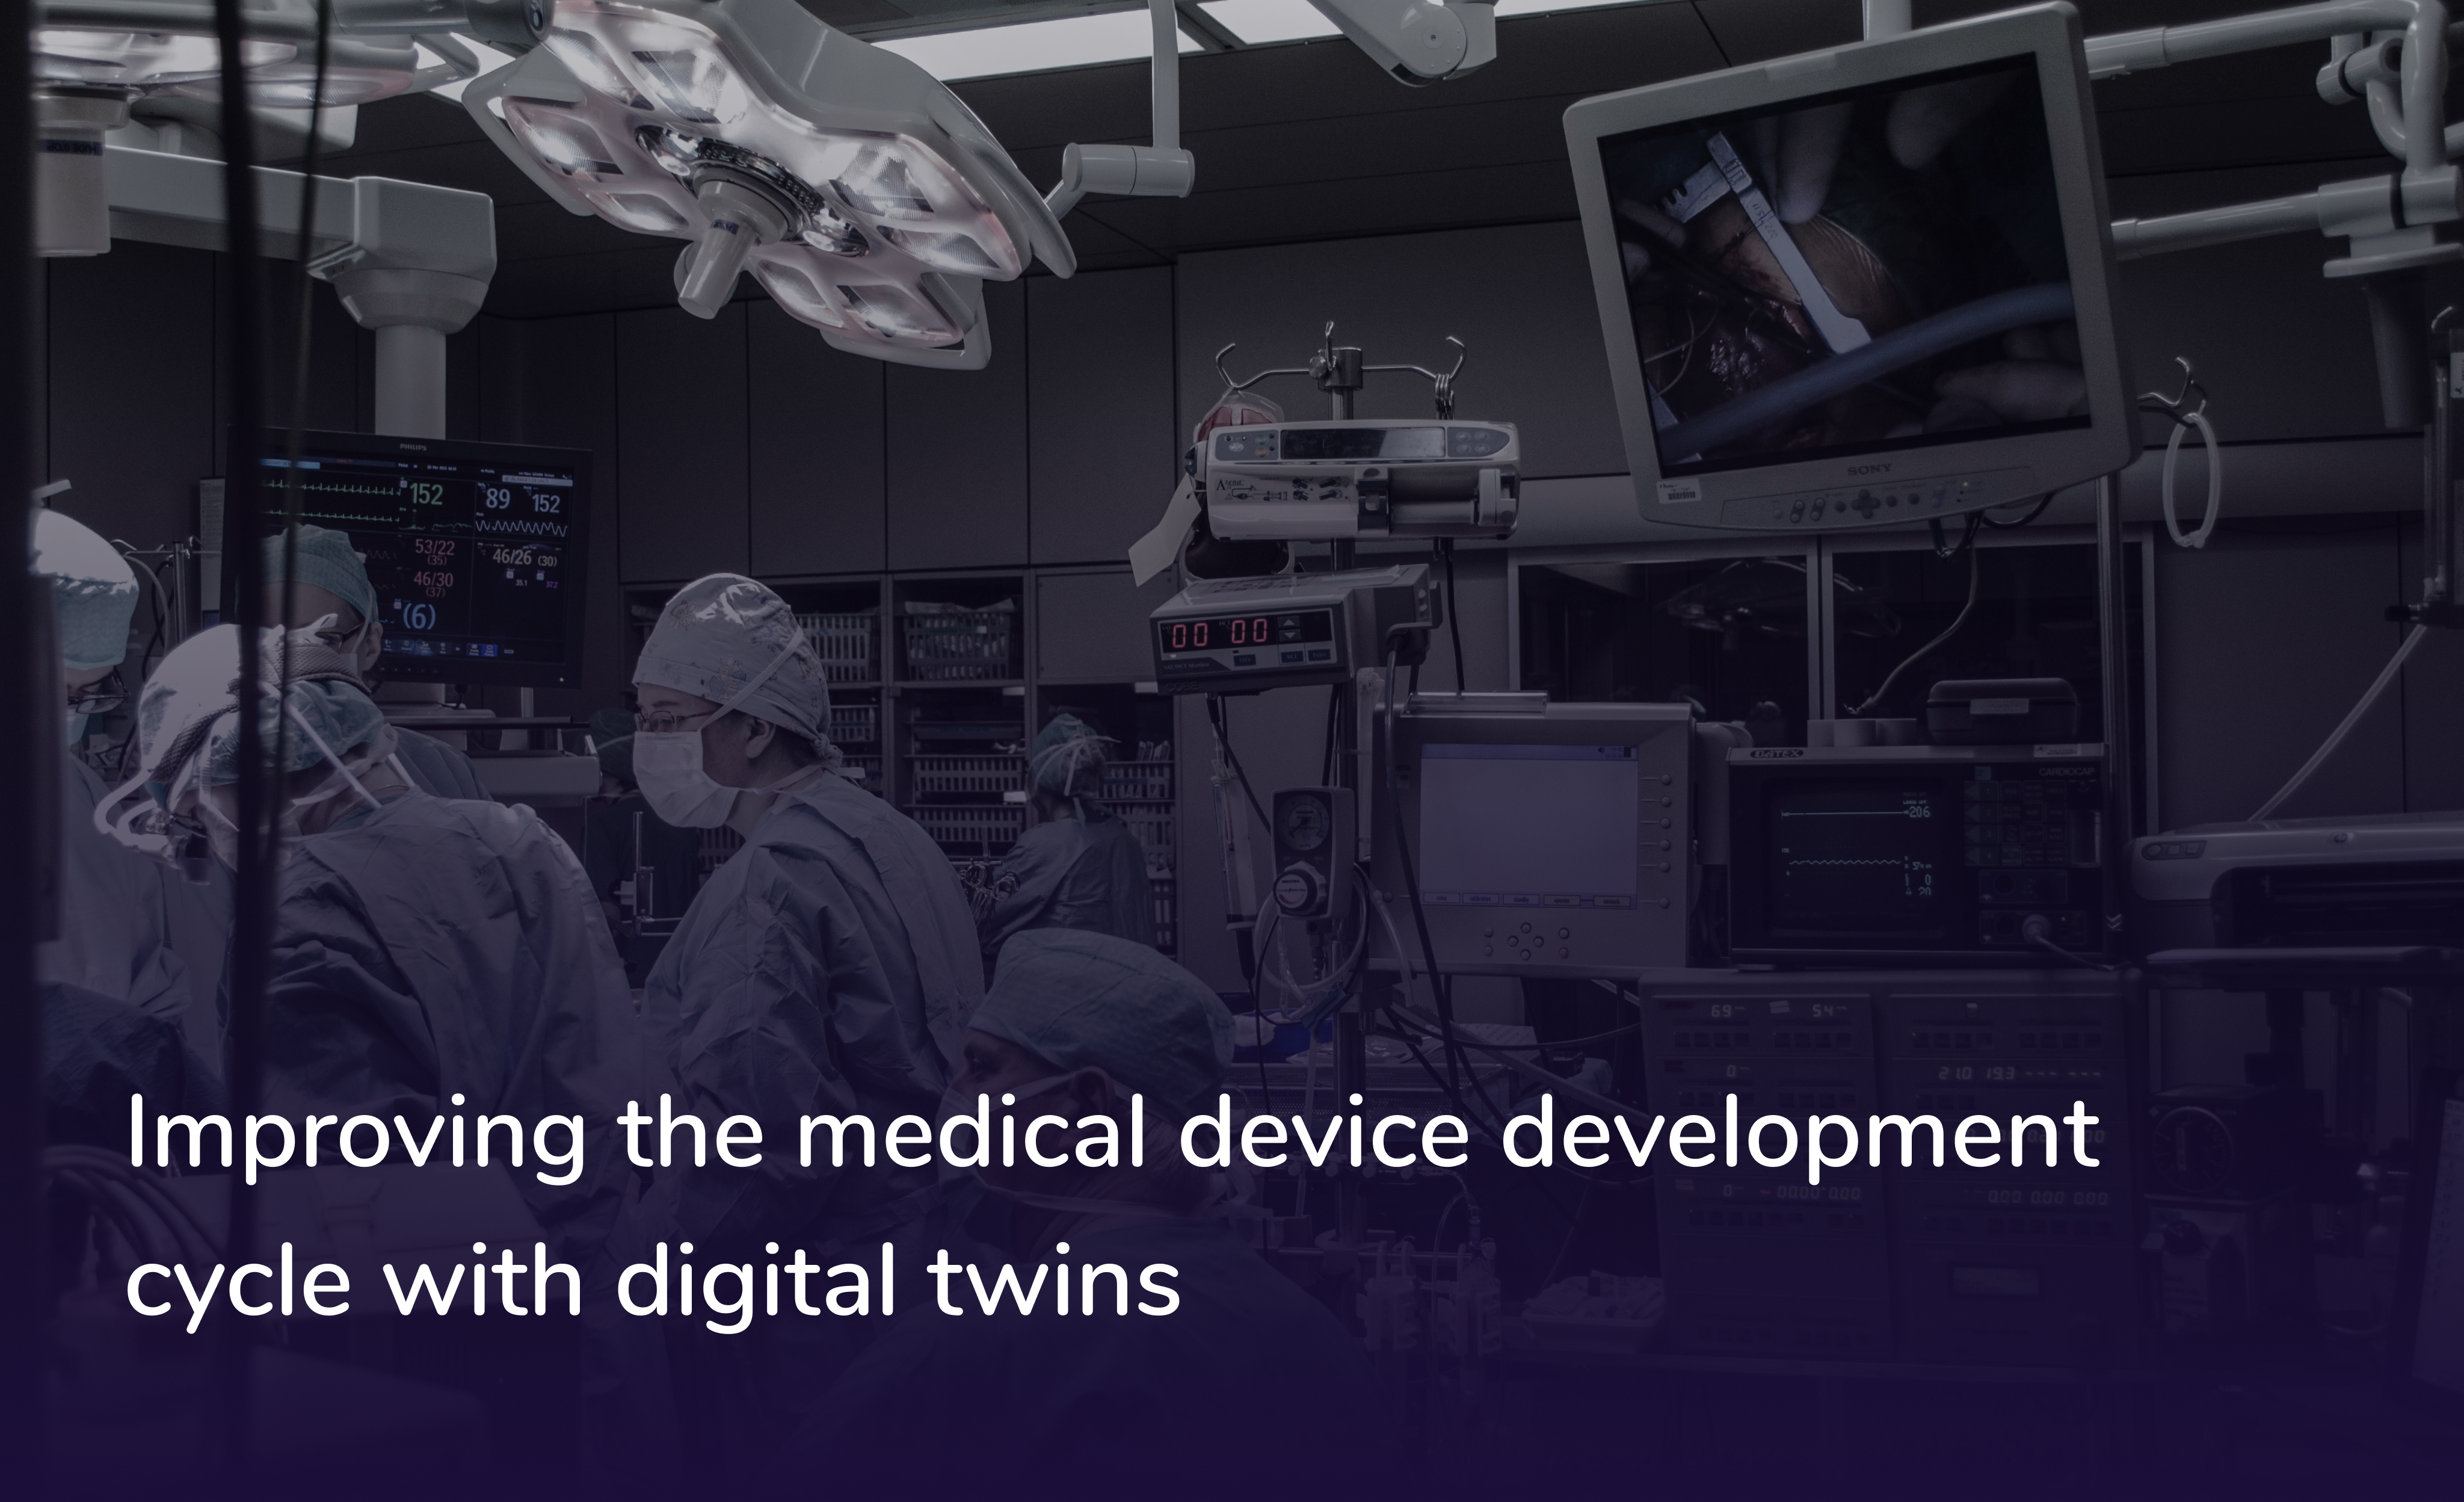 surgeons and doctors in an operating room and a text overlay saying Improving the medical device development cycle with digital twins